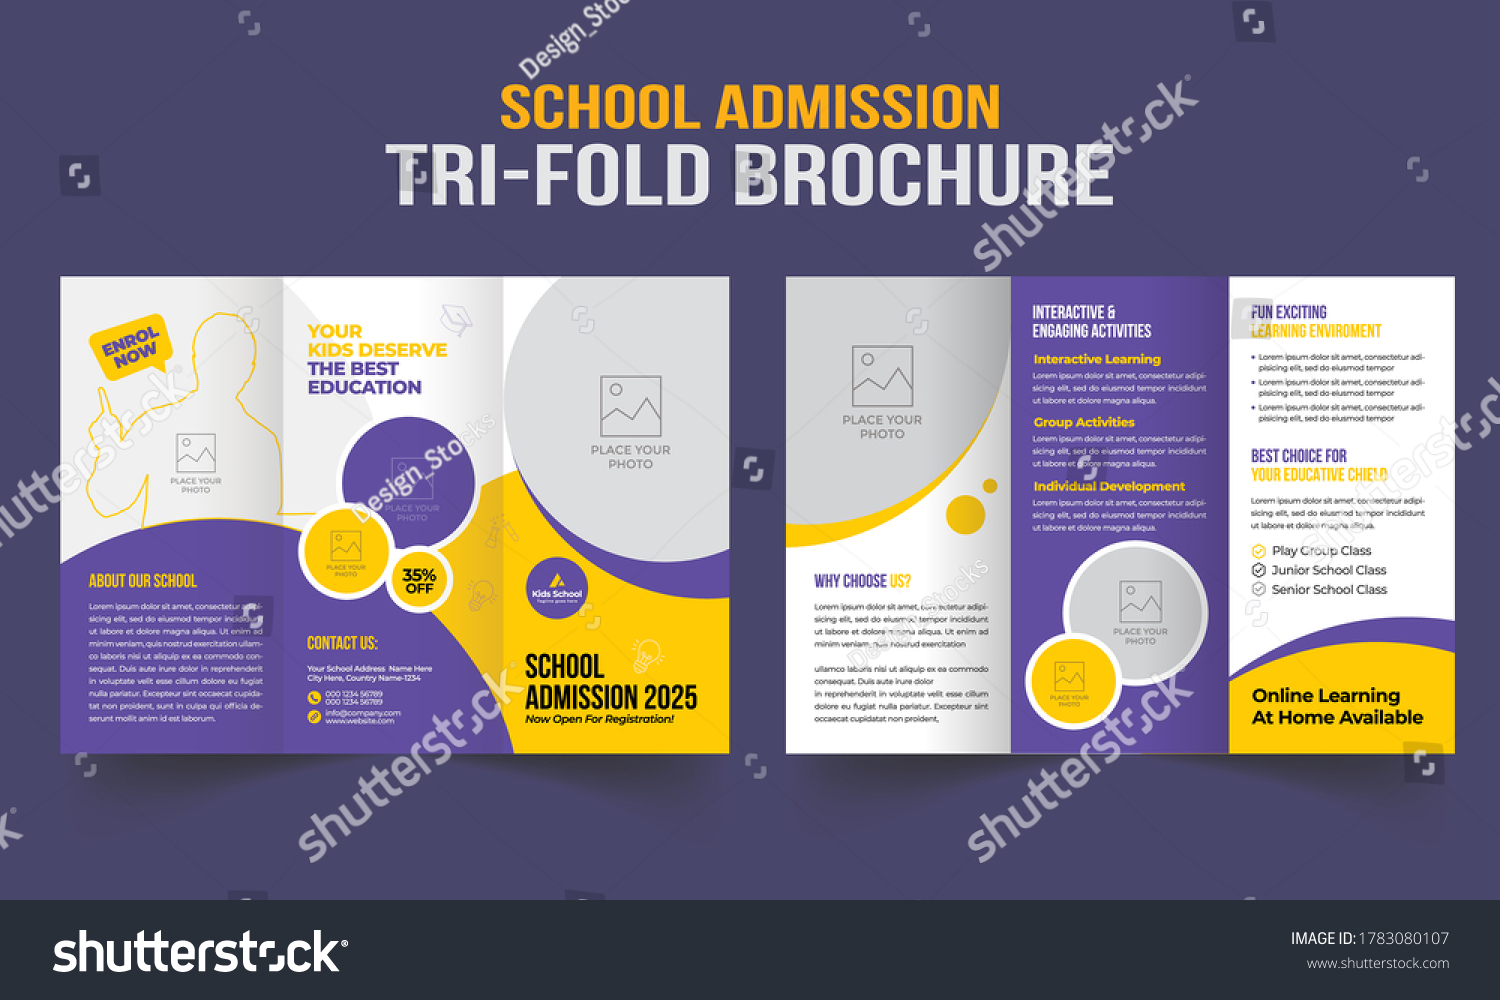 School Admission Trifold Brochure Template Kids Stock Vector Pertaining To Brochure Templates For School Project